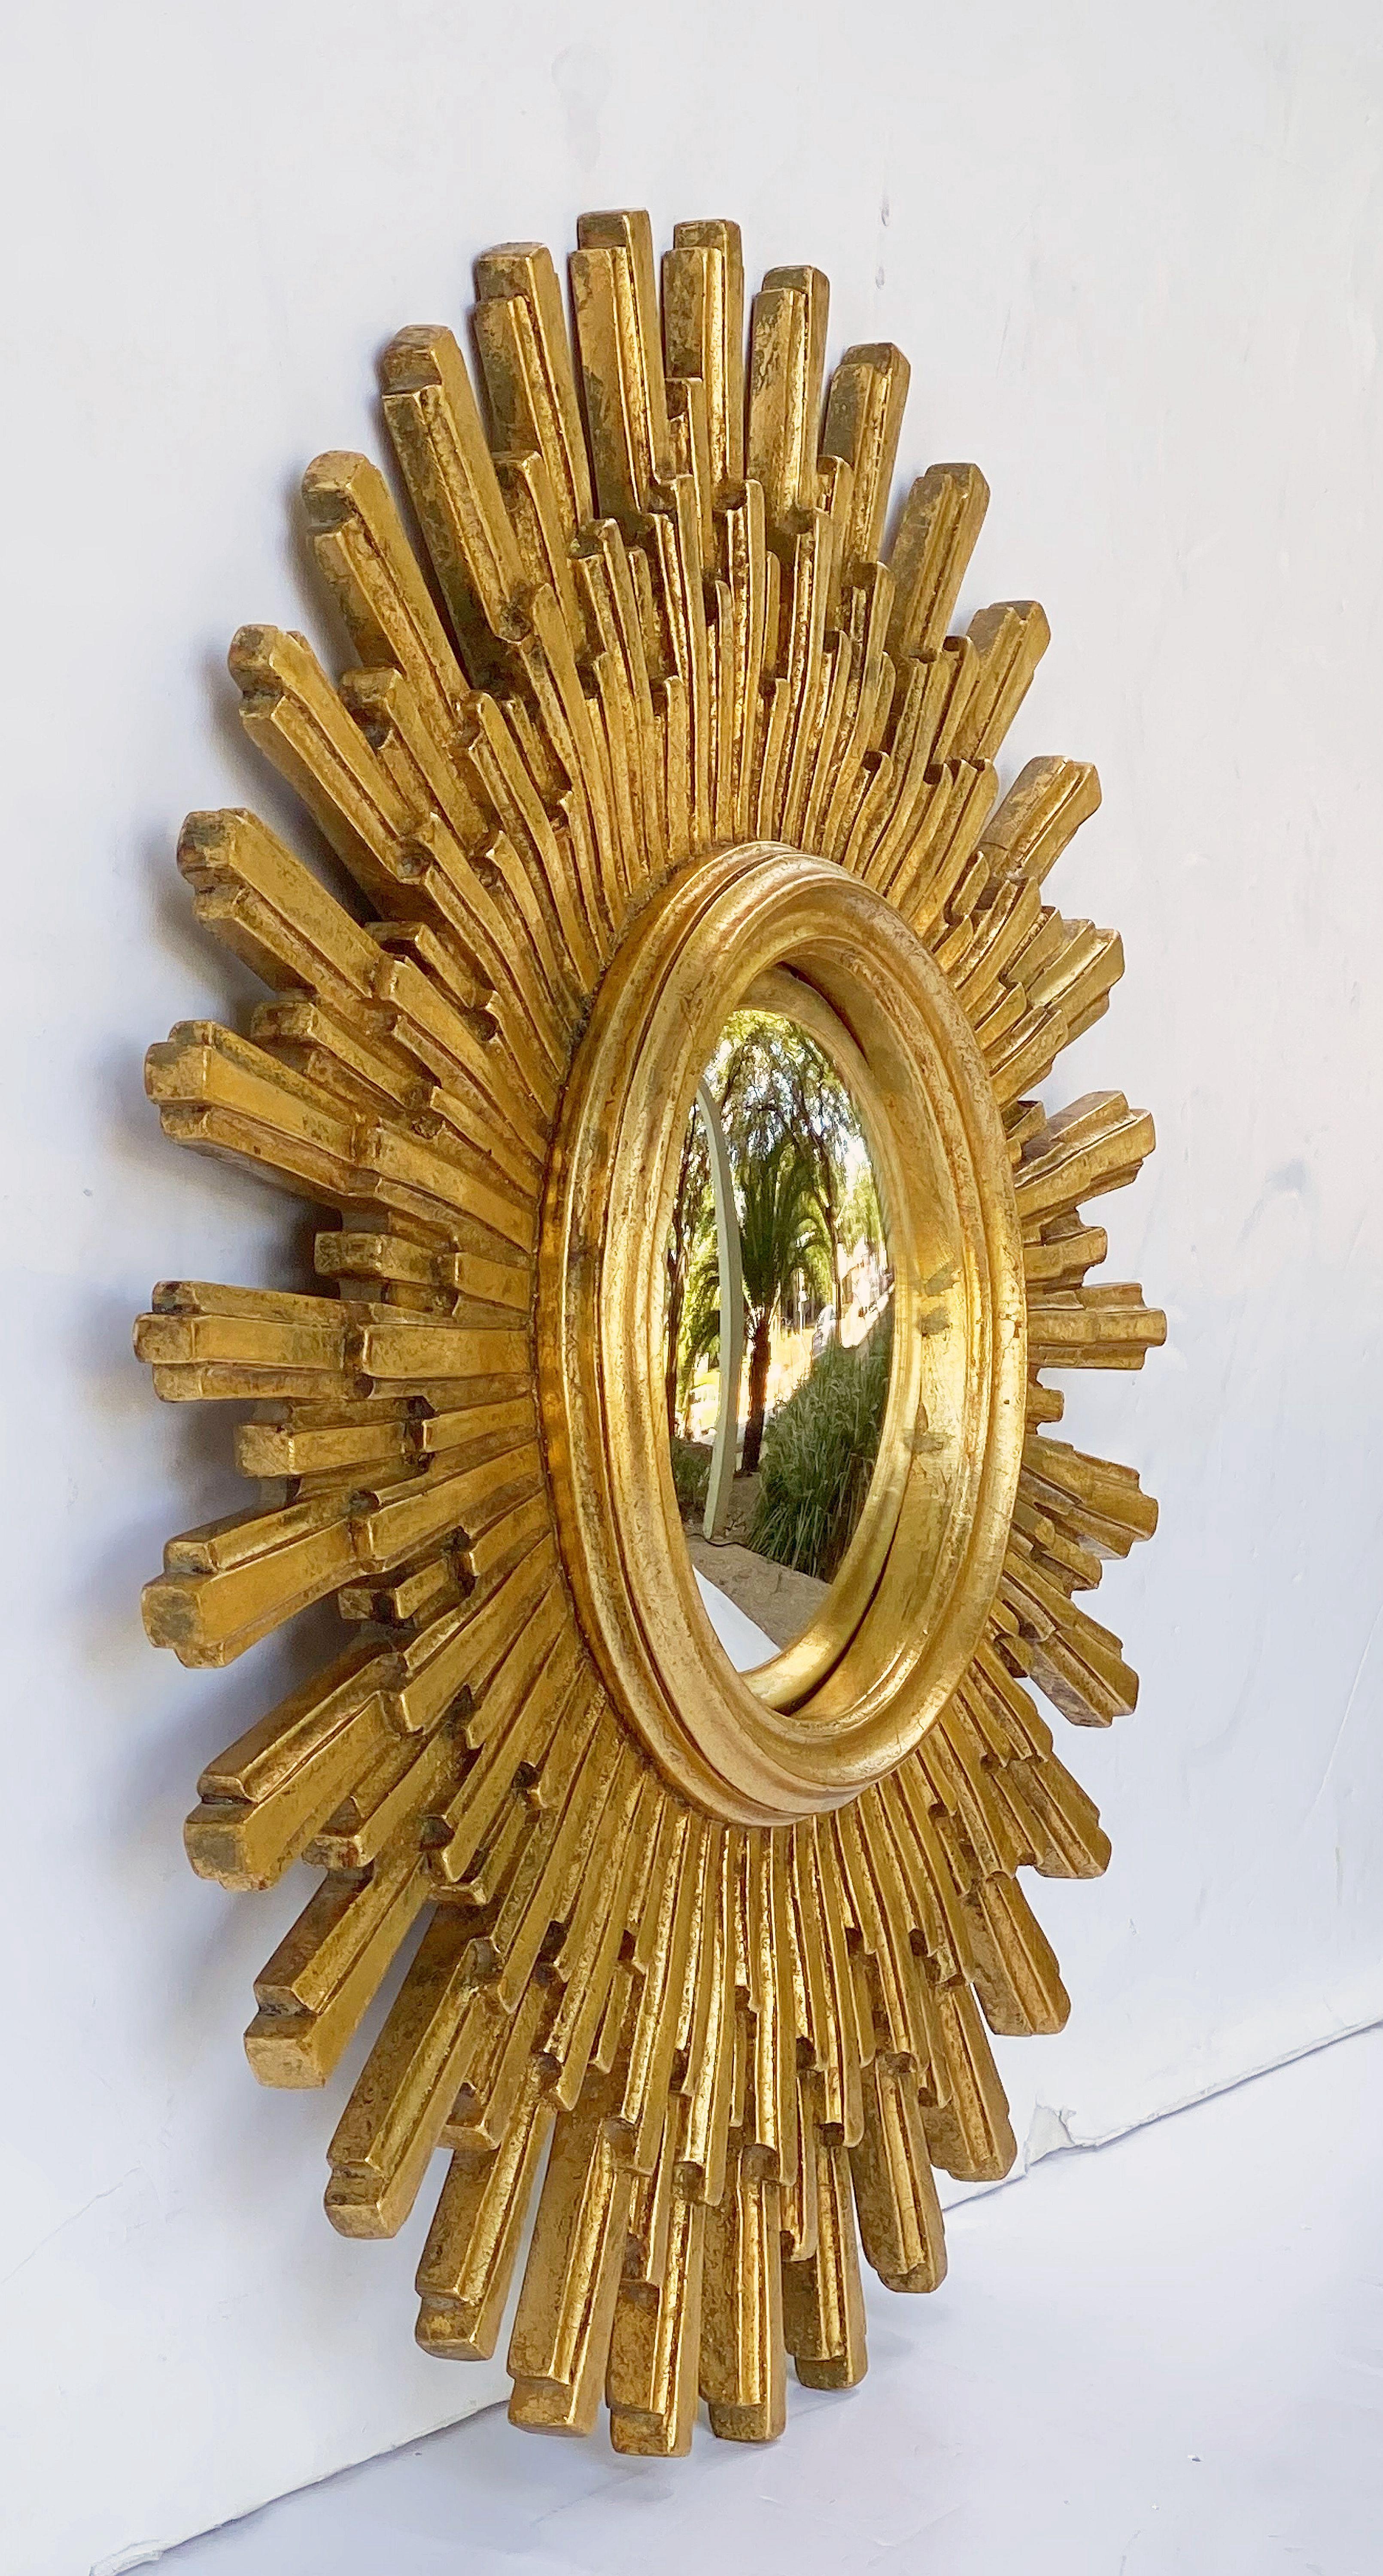 A lovely French gilt sunburst (or starburst) mirror, measures: 22 inches diameter, with round mirrored convex glass center in a moulded cast frame.